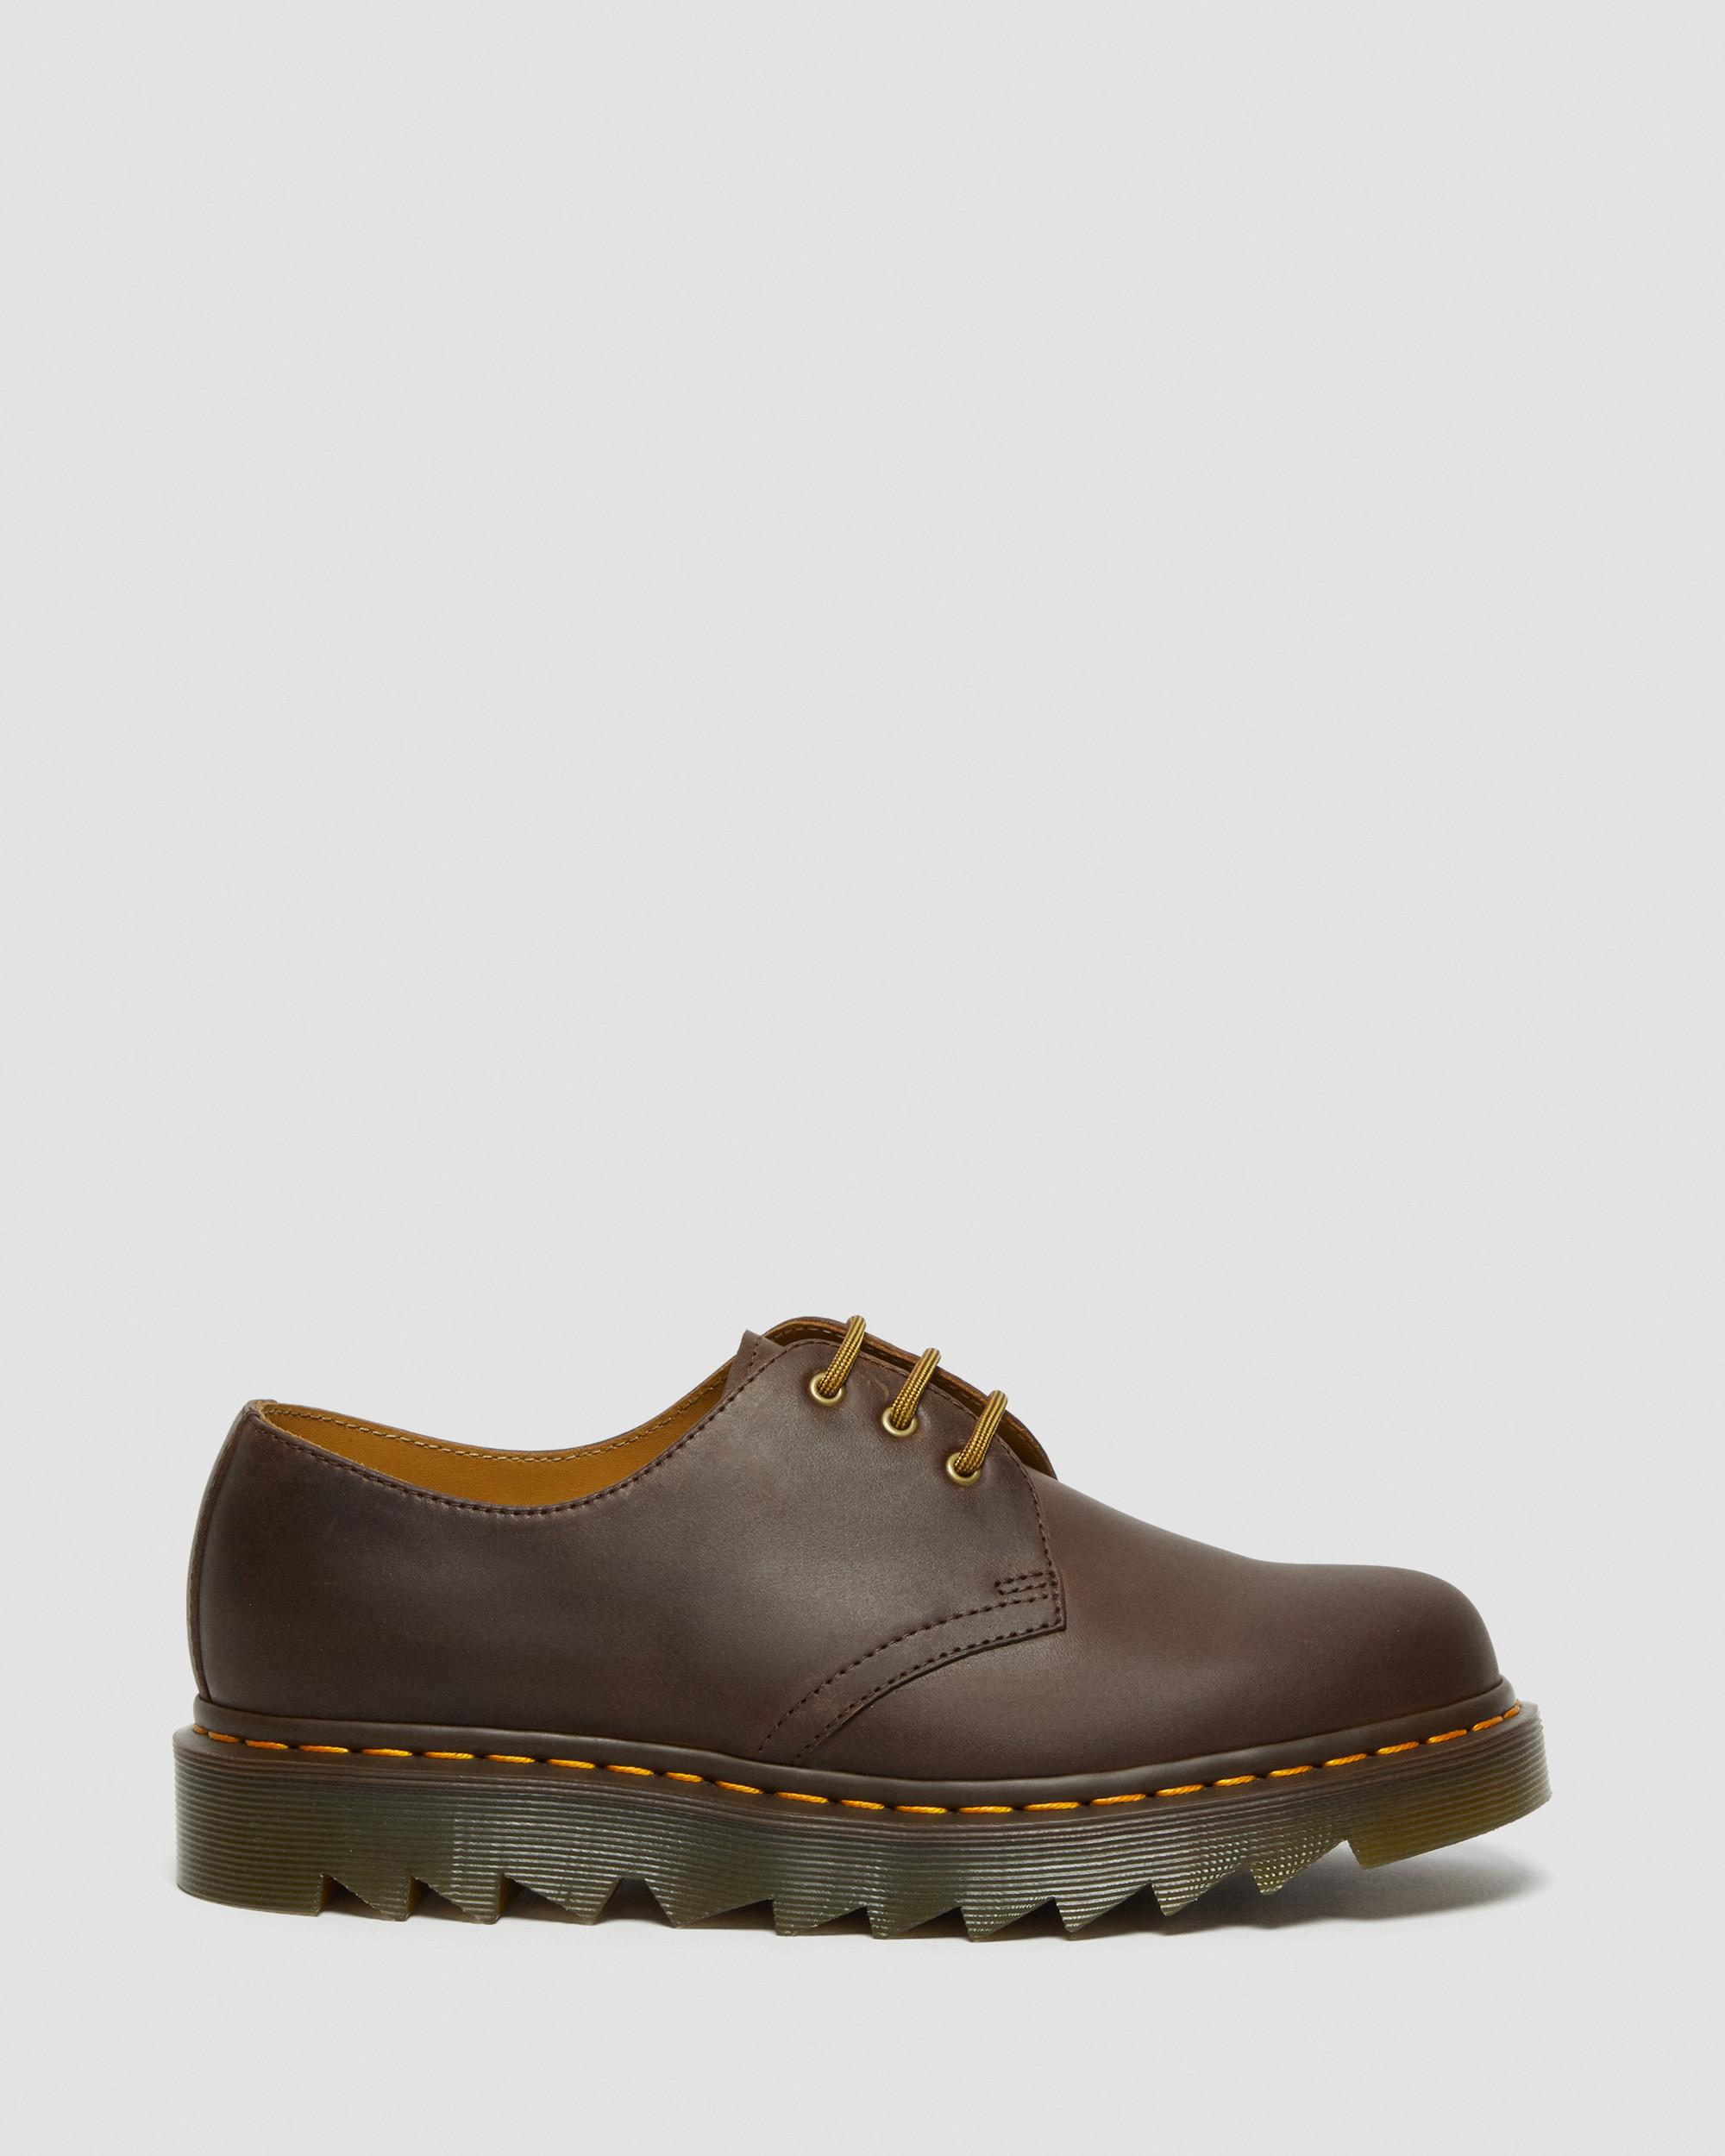 DR MARTENS 1461 Ziggy Leather Oxford Shoes